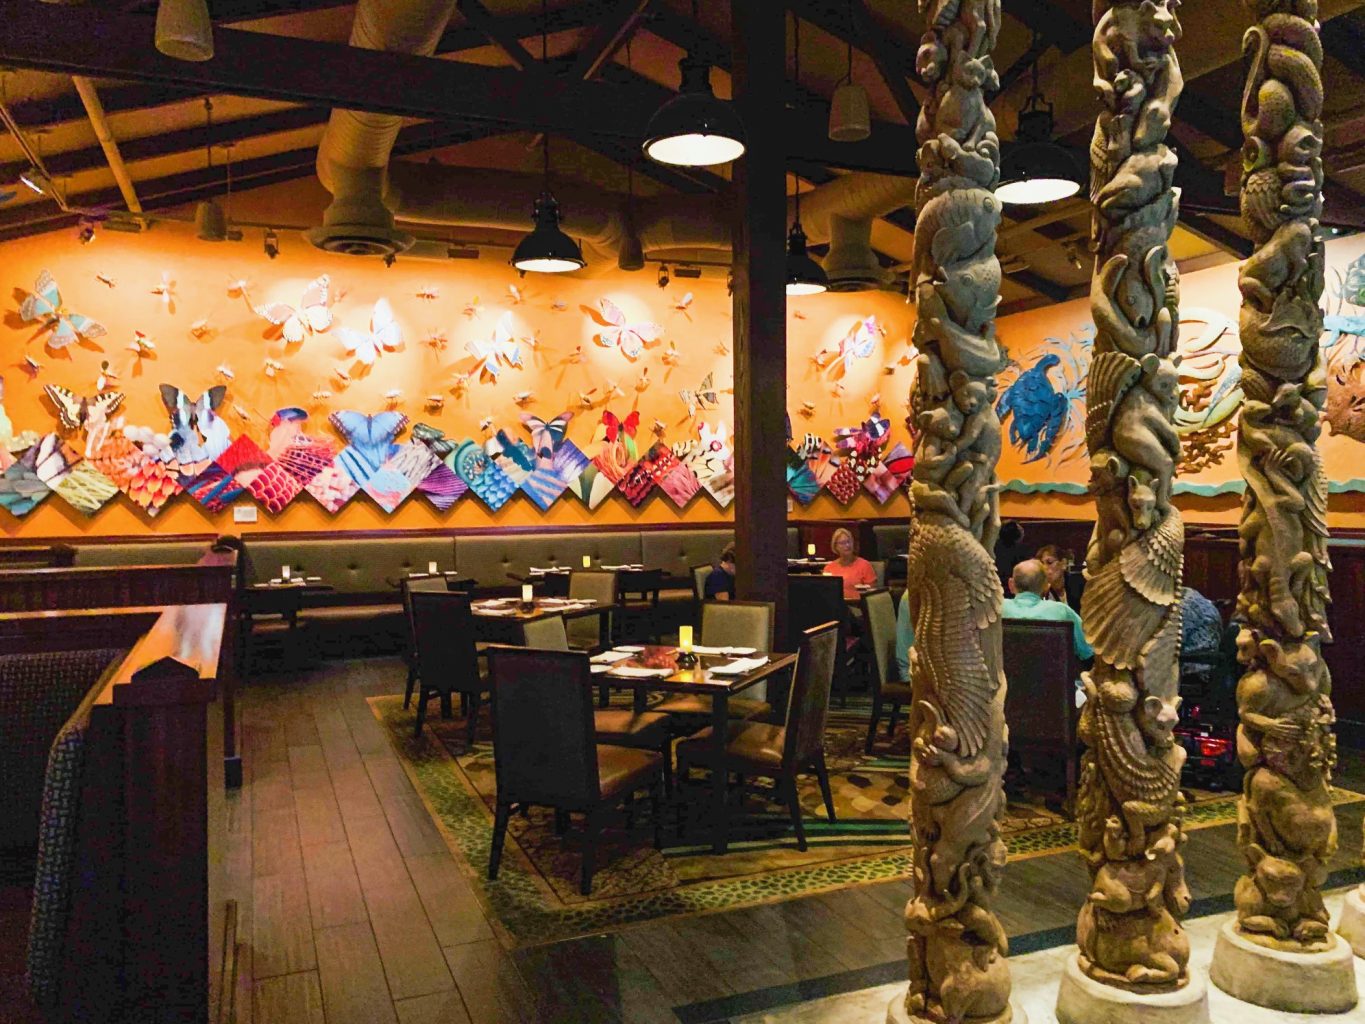 The elaborate animal totem poles in front of brightly colored background is only one sneak peak of the inside of one of the best Magic Kingdom restaurants. 